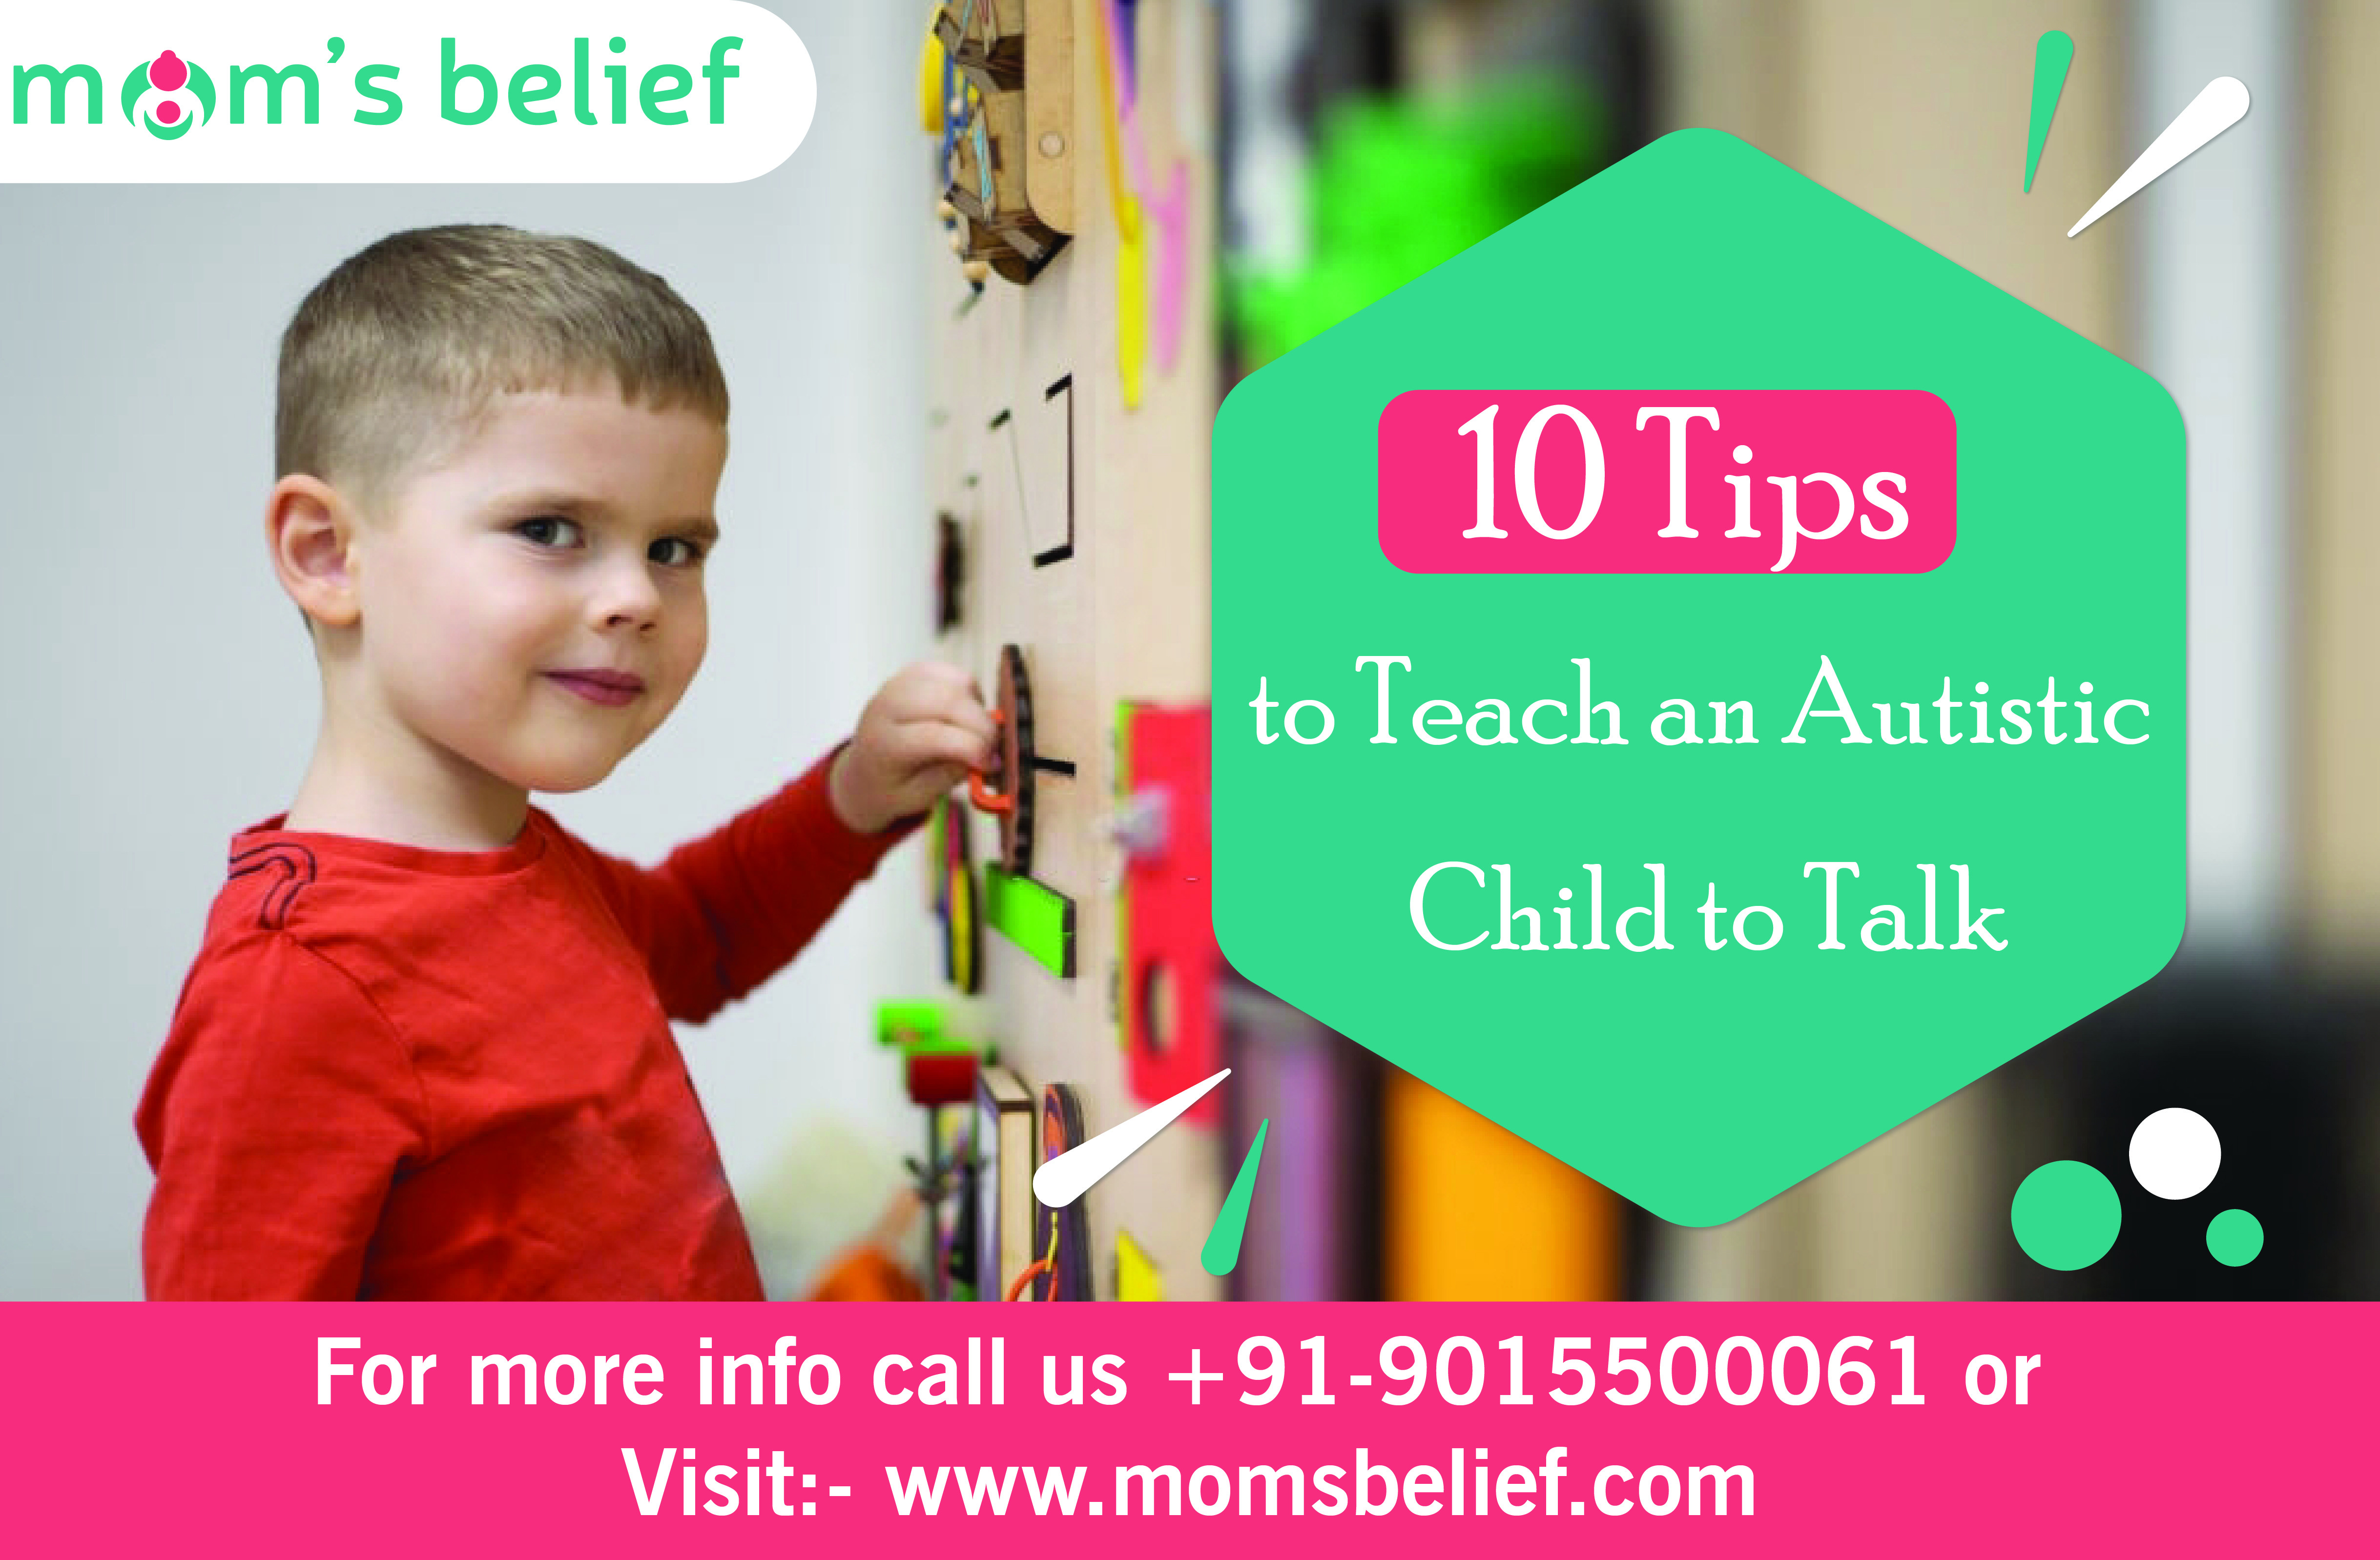 10 Tips to Teach an Autistic Child to Talk